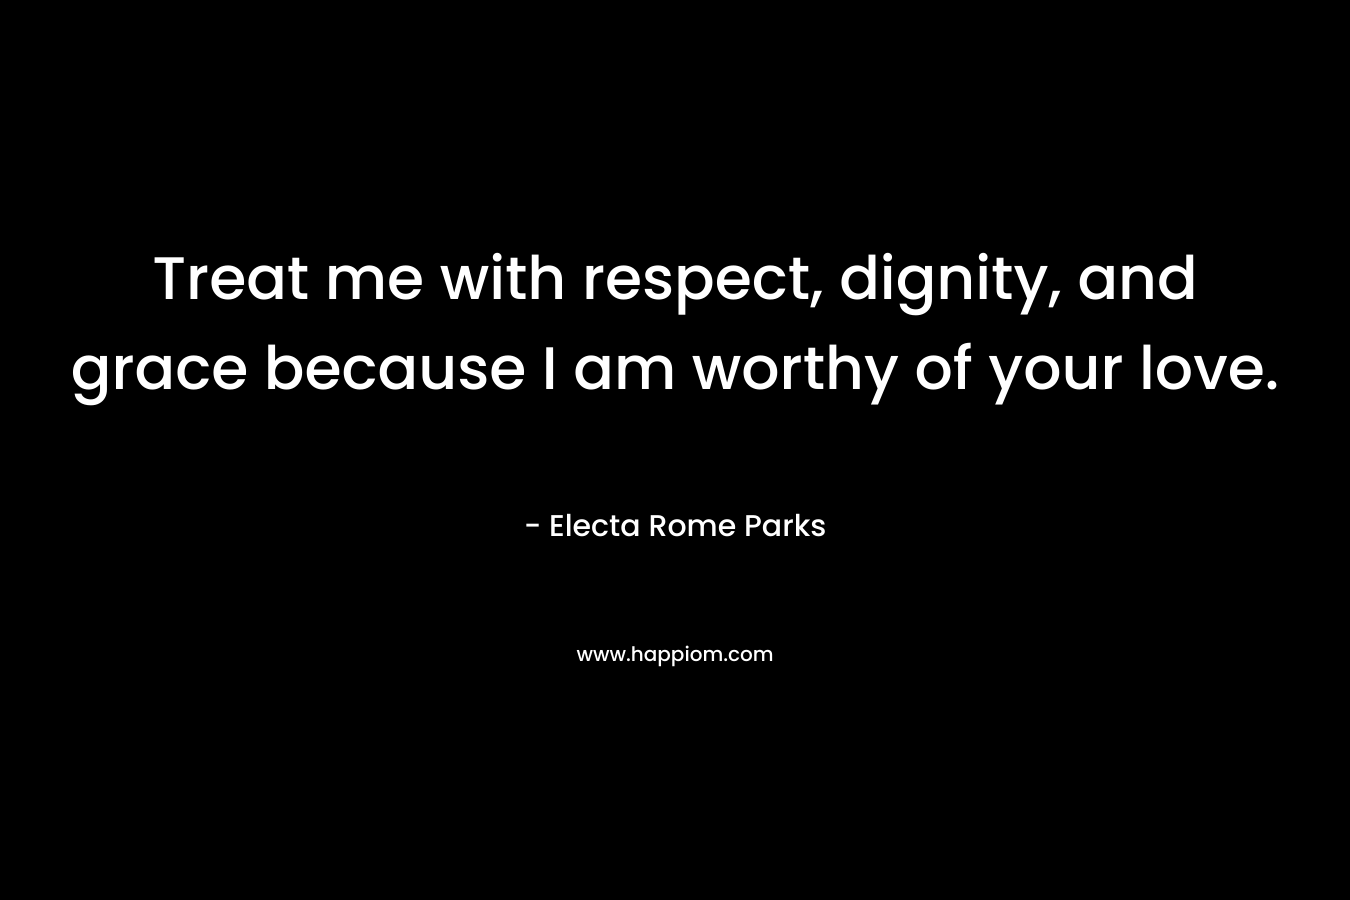 Treat me with respect, dignity, and grace because I am worthy of your love. – Electa Rome Parks